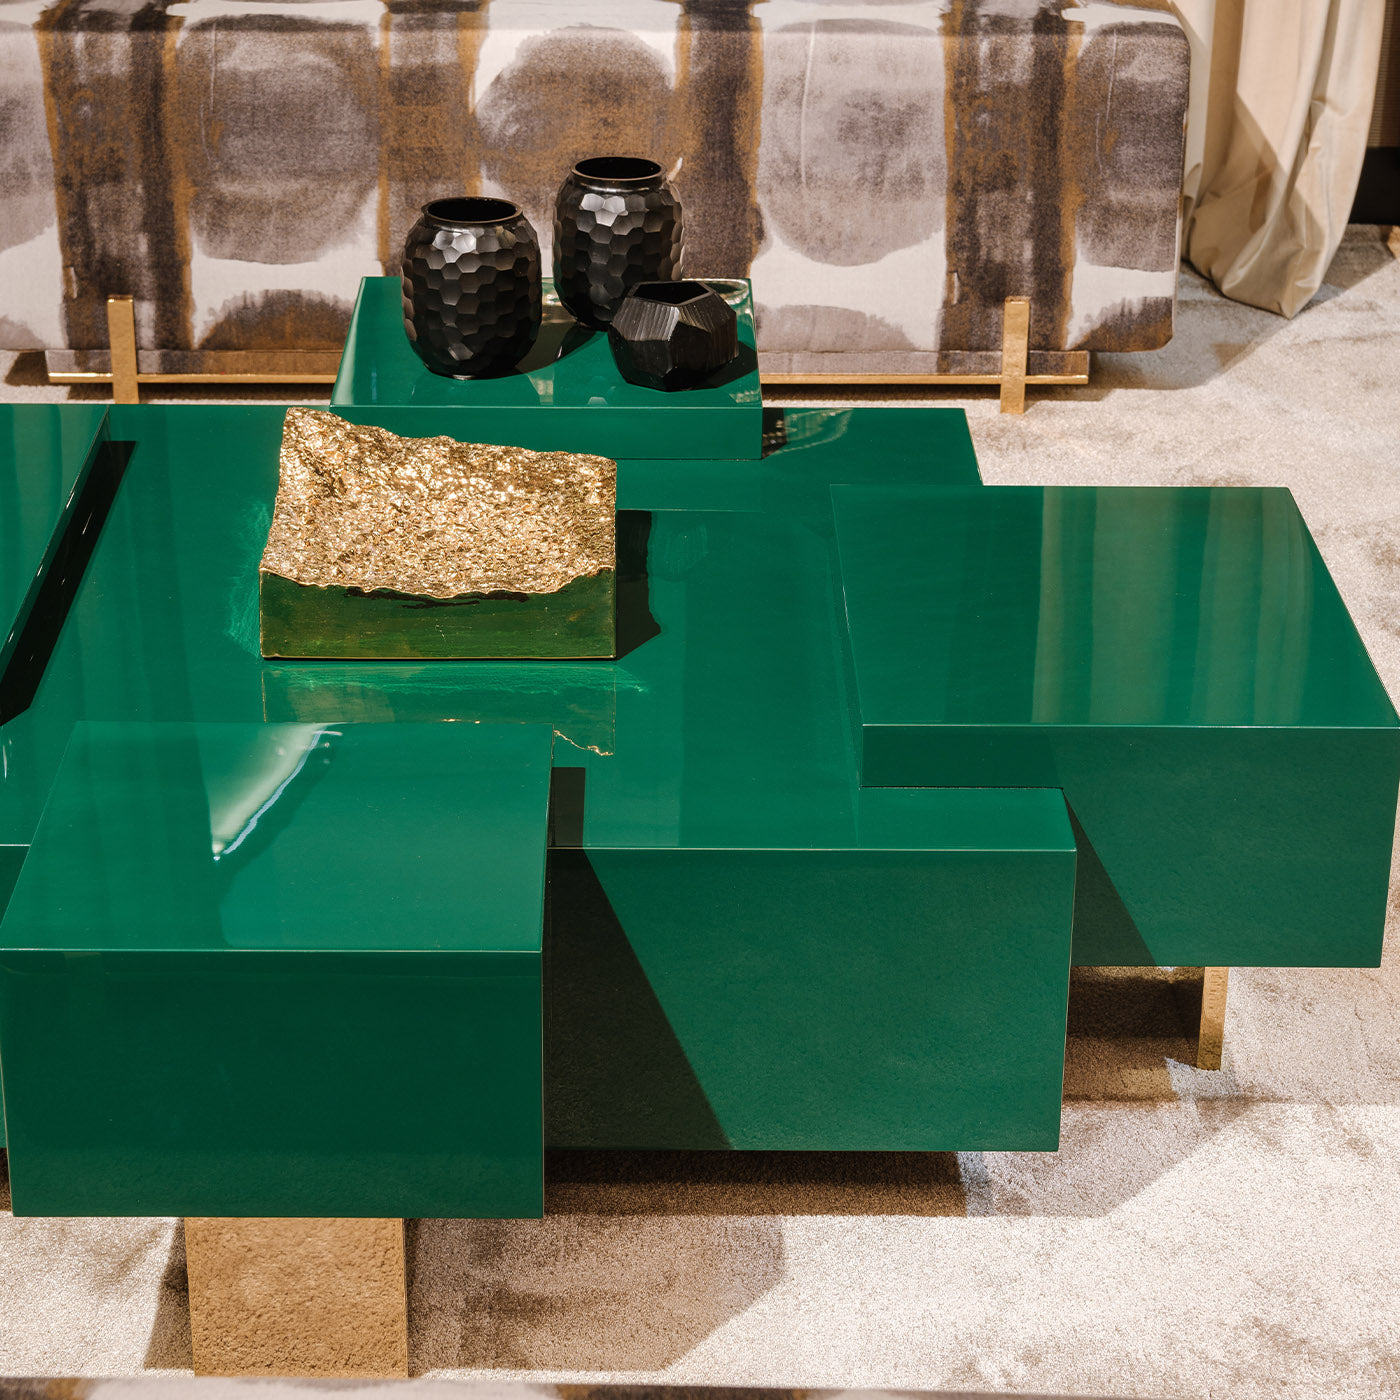 New Mark Coffee Table by Giannella Ventura - Alternative view 3